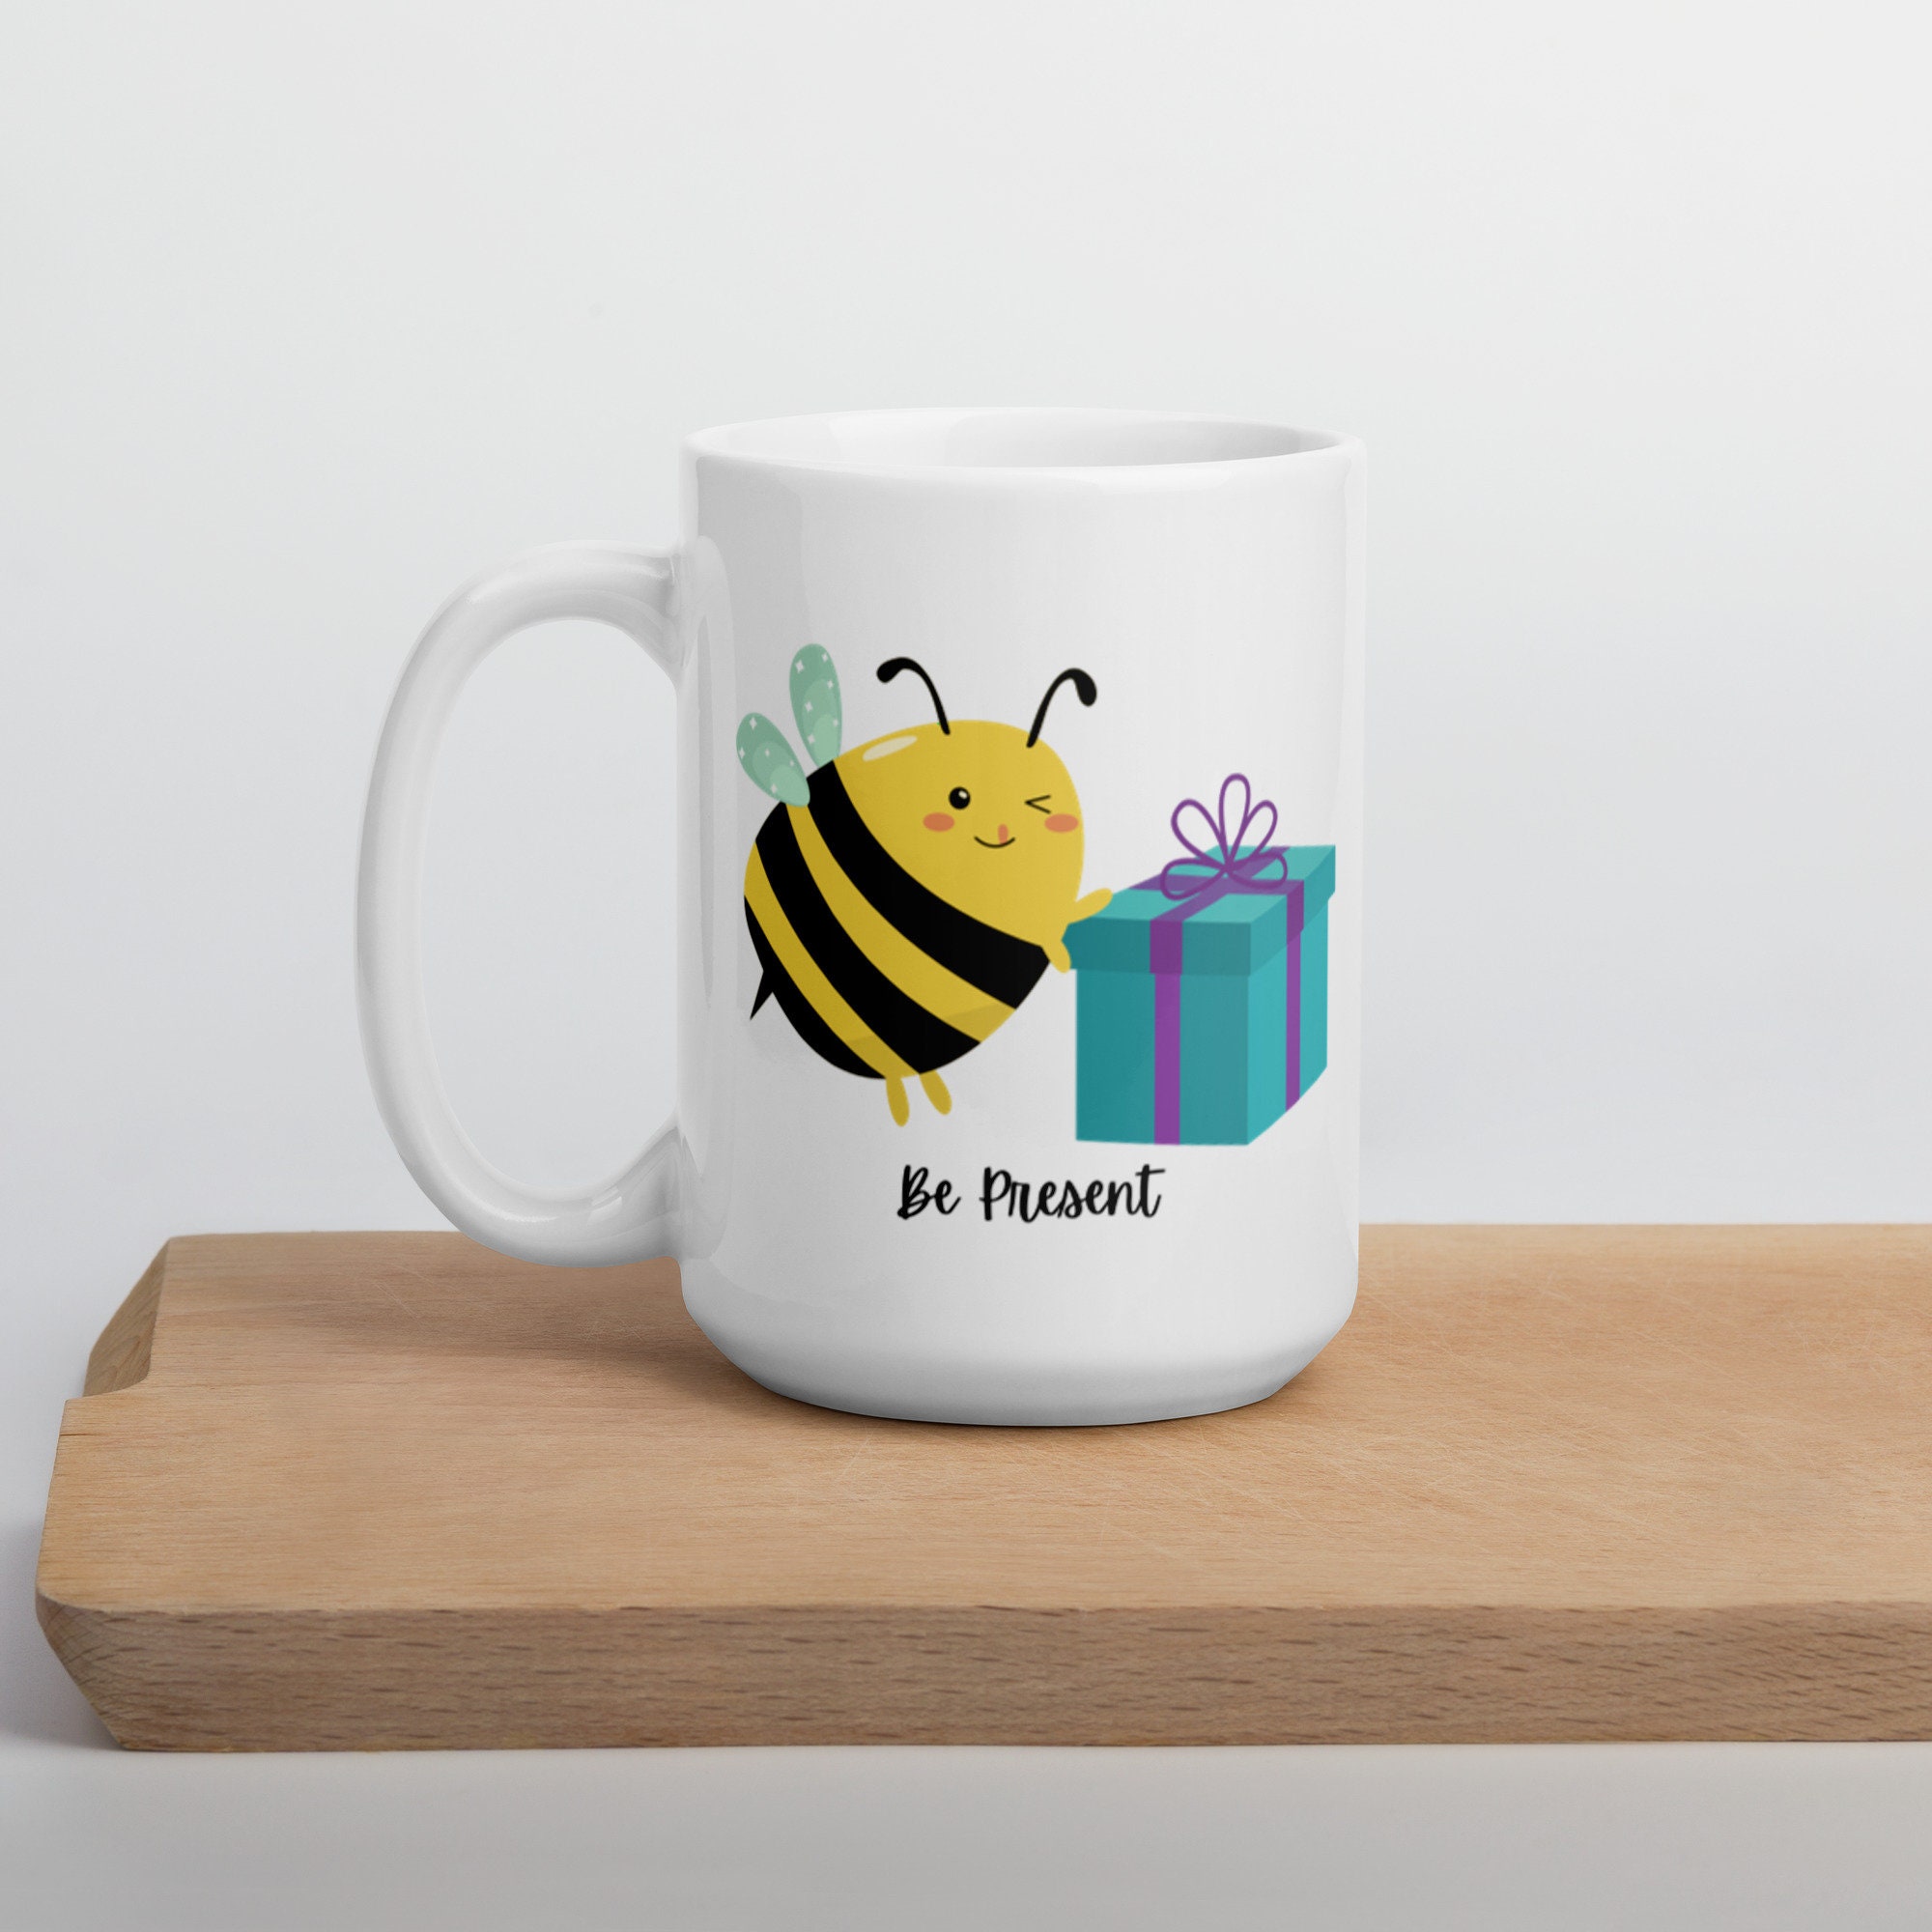 Bee the Person / Inspirational Cup / Car Office Non Spill / Encouragement  Mug / Gift for Her / Entrepreneur Travel Mug / Finding Lifes Magic 